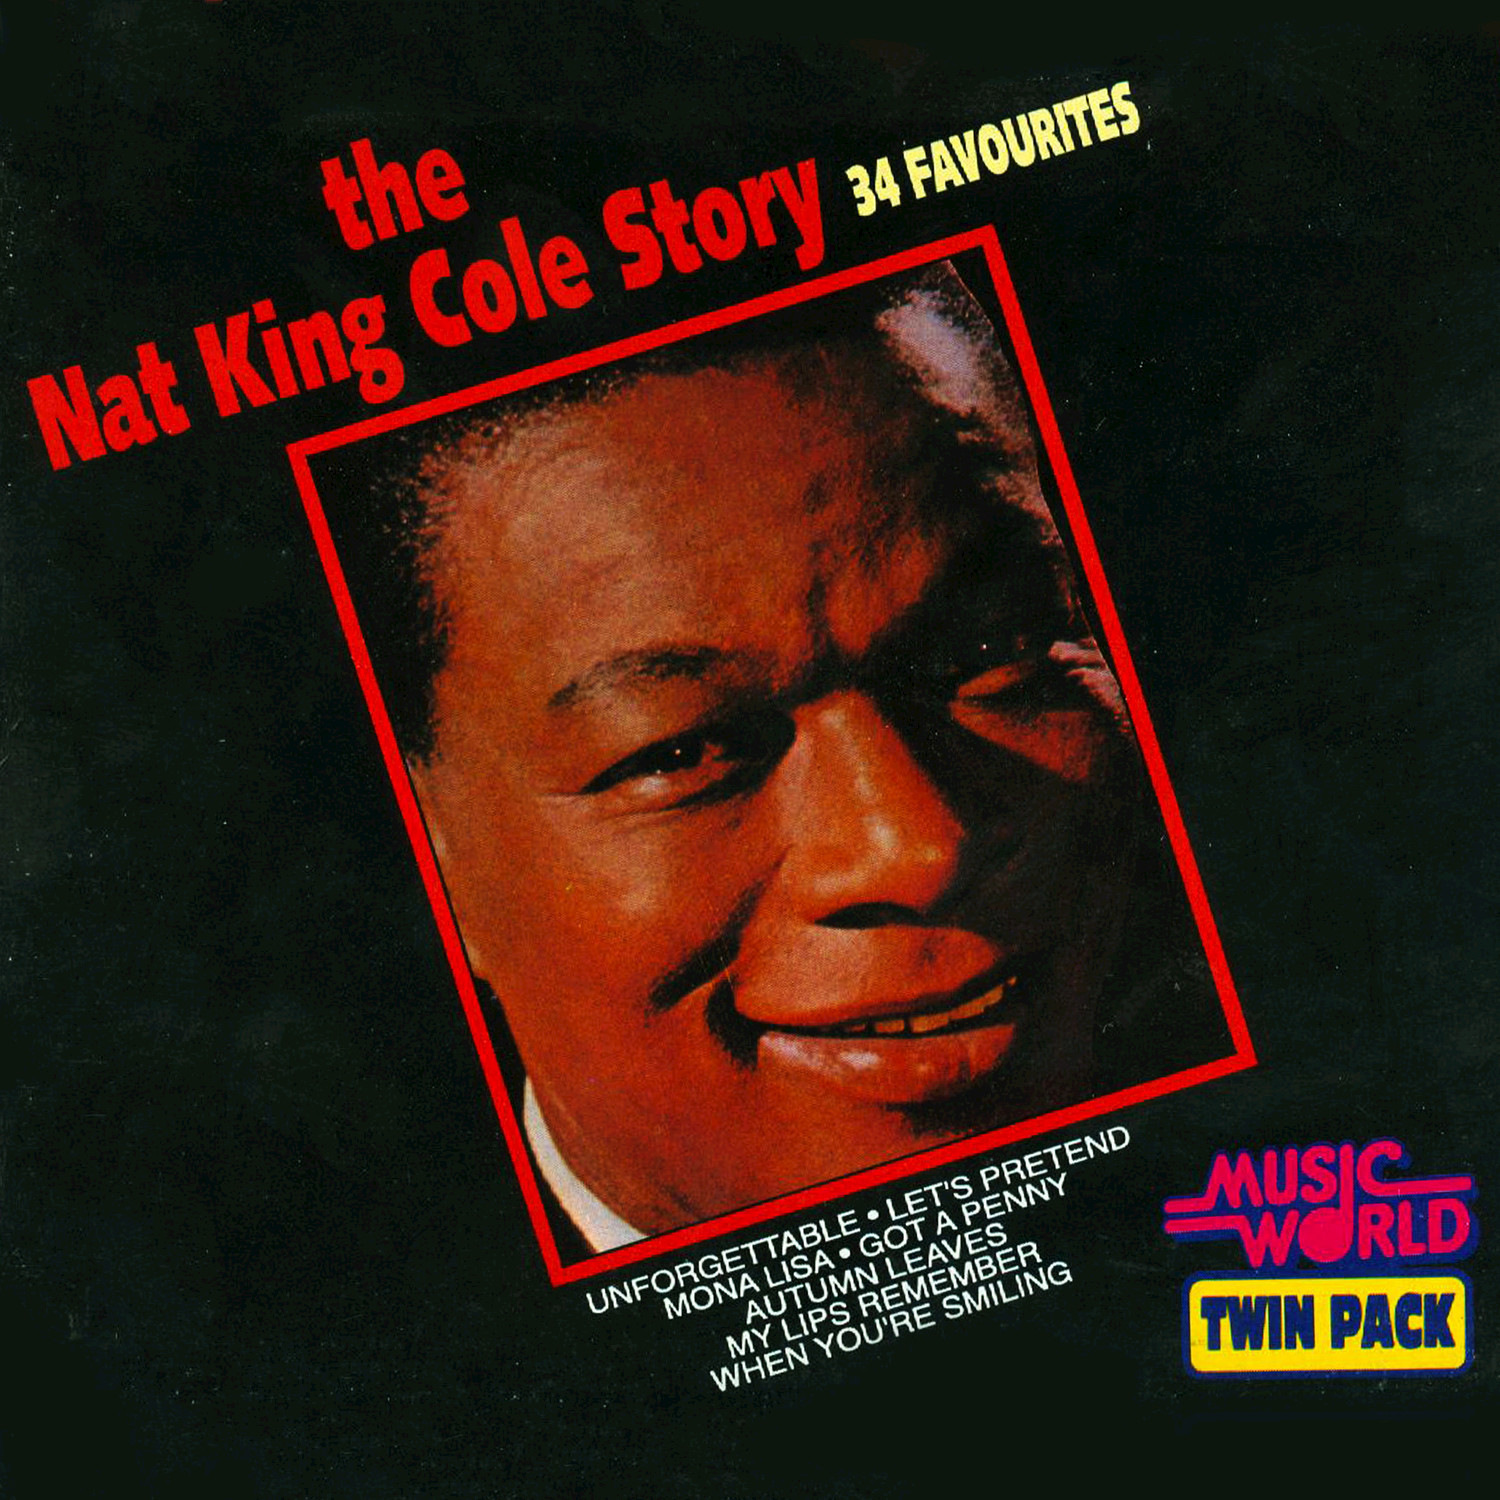 The Nat King Cole Story